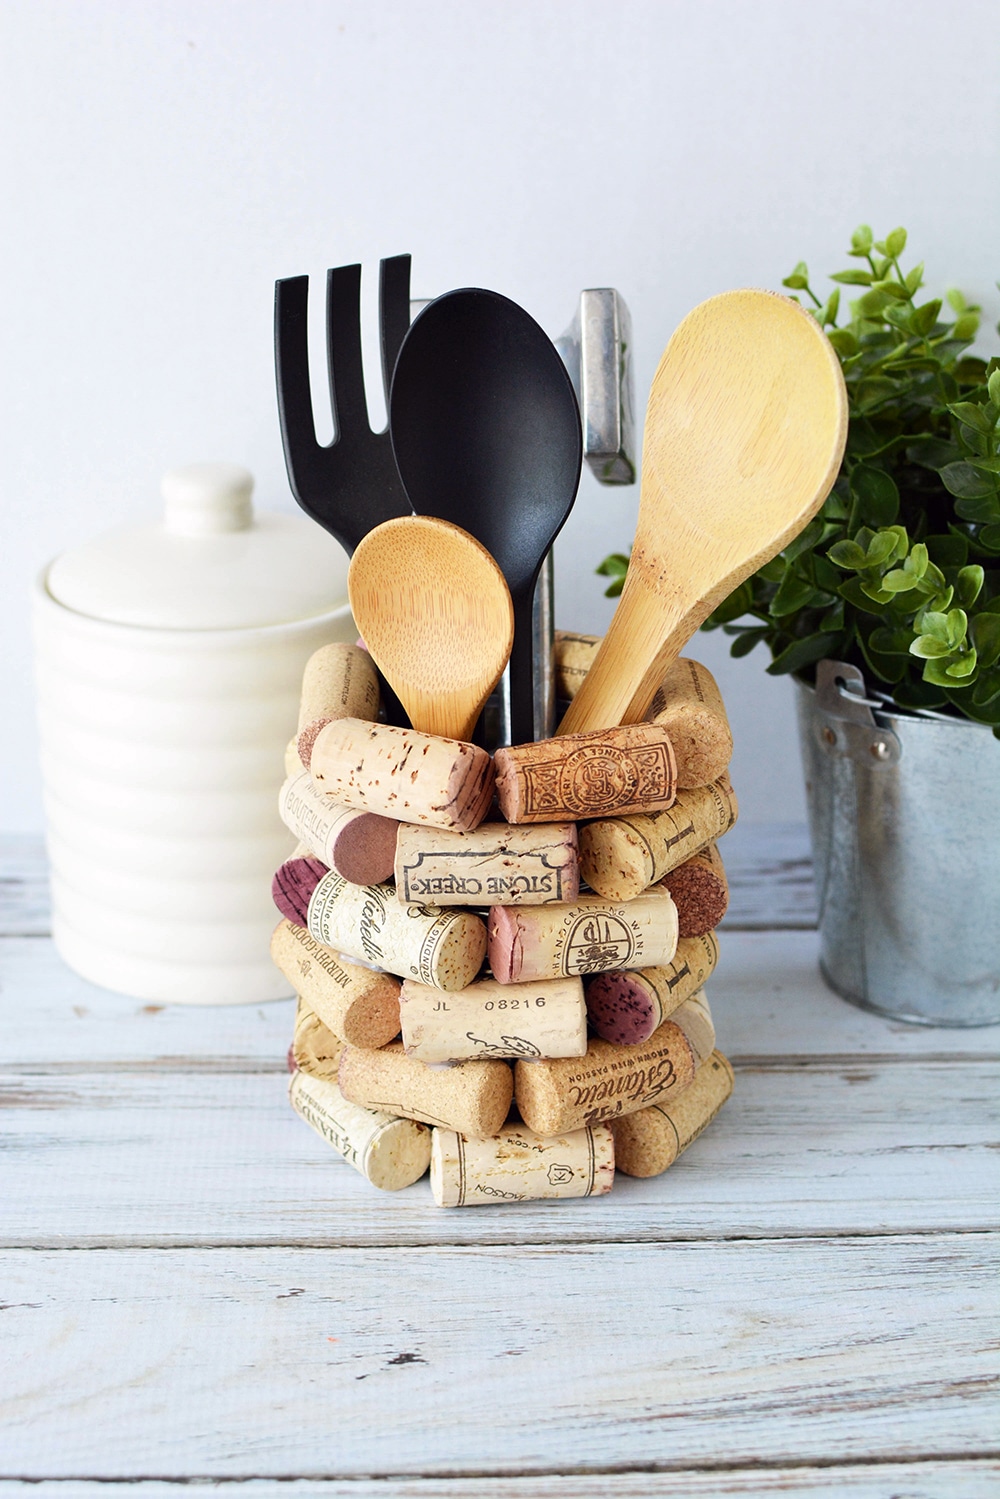 You won't believe this wine cork utensil holder until you see it.